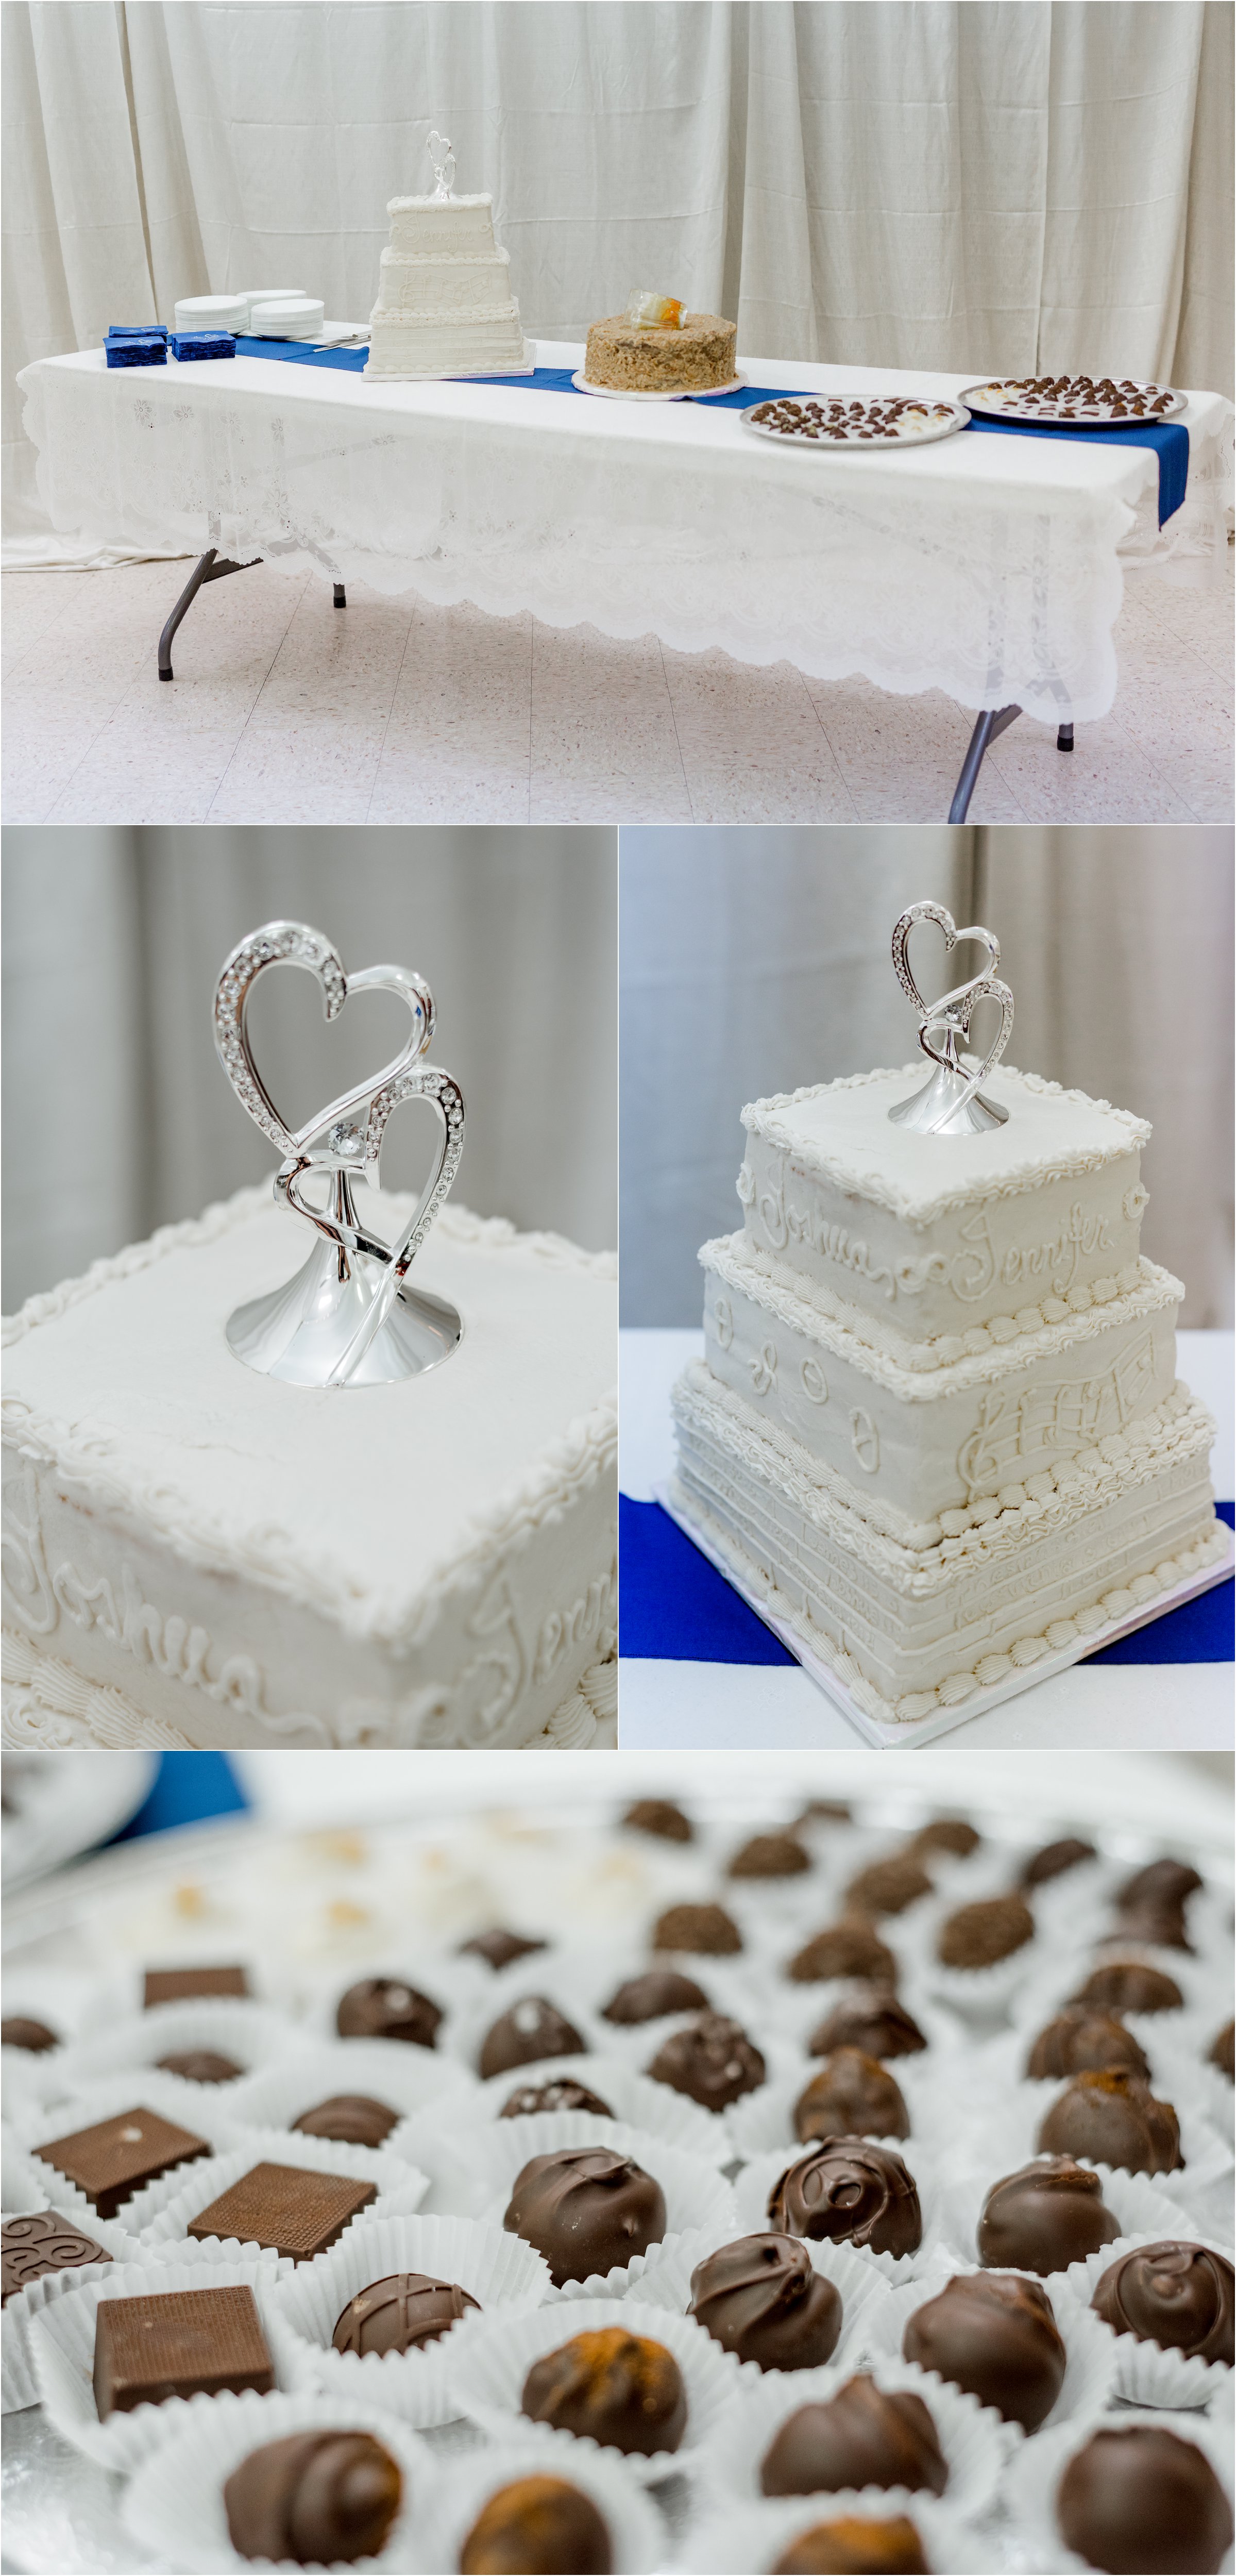 white wedding cake with silver heart cake topper sits next to a groom's carrot cake and truffles